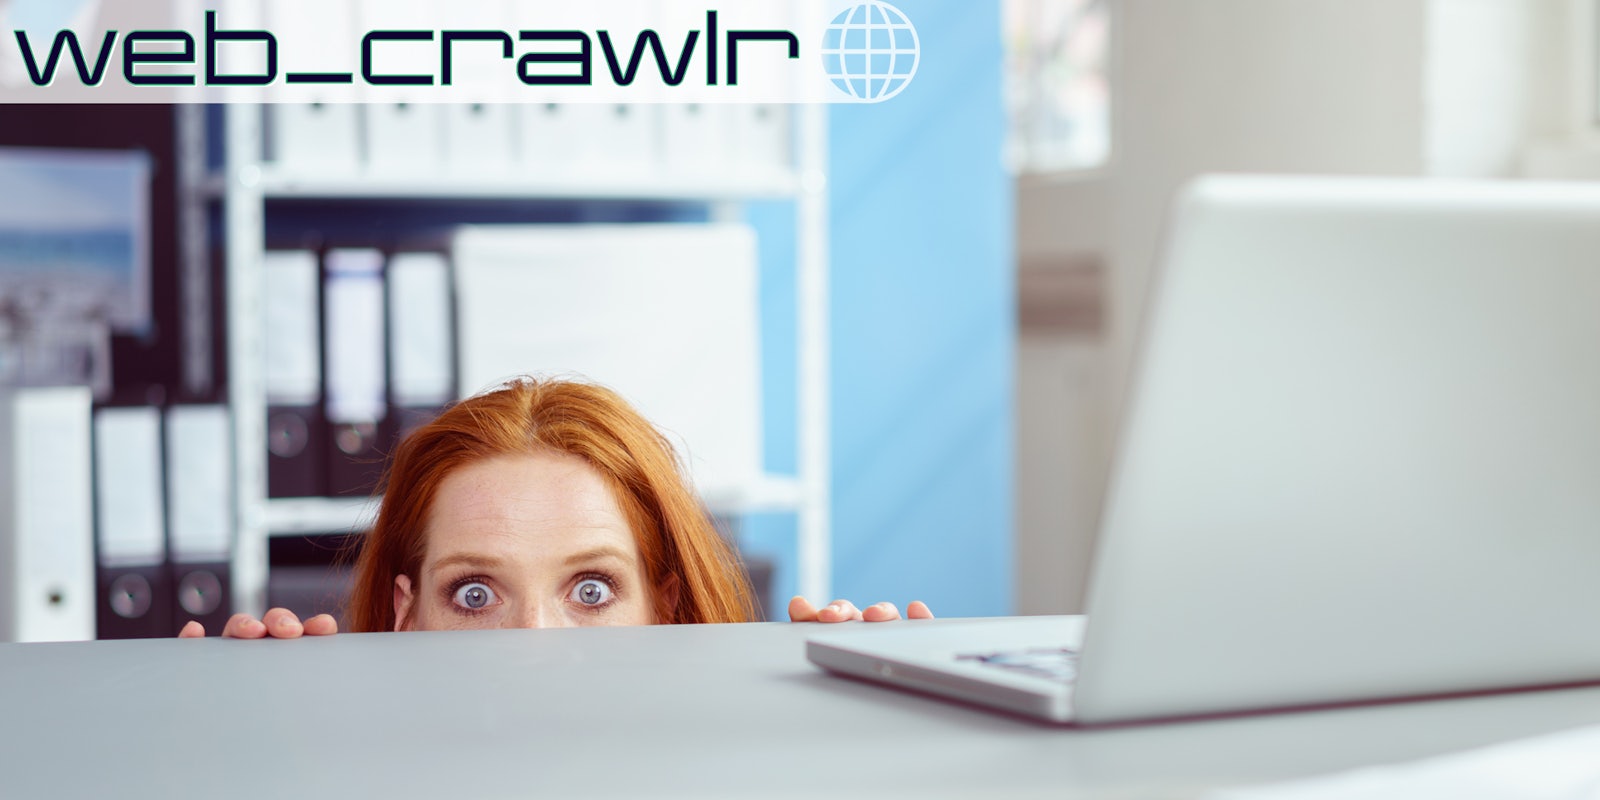 A woman hiding under a desk at work. The Daily Dot newsletter web_crawlr logo is in the top left corner.